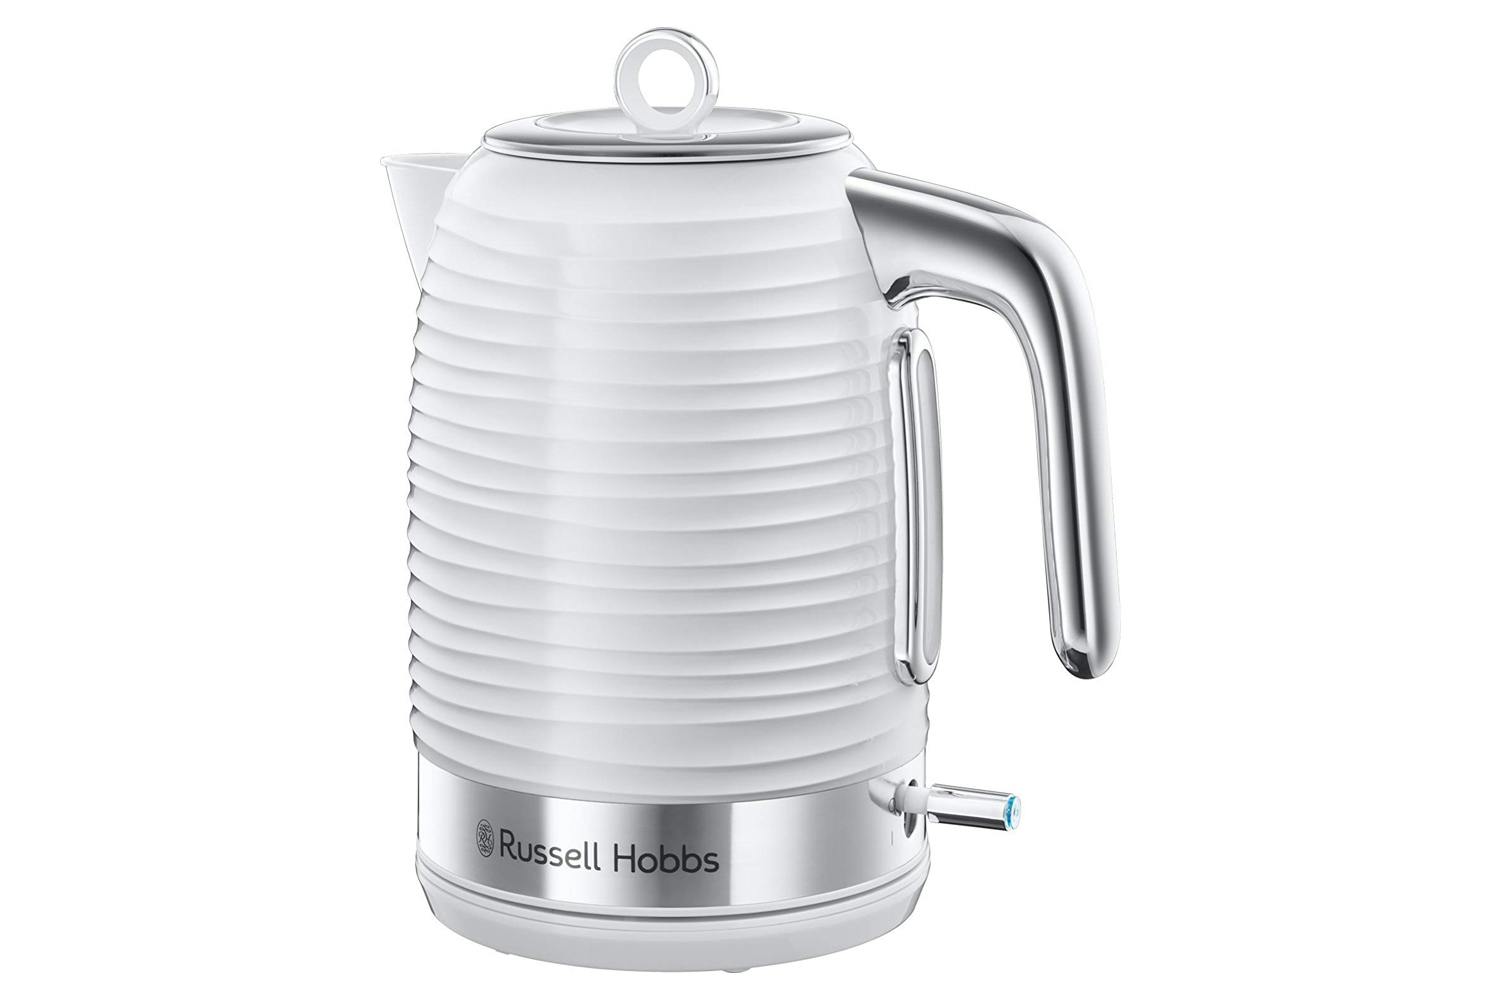 Russell Hobbs 1.7L Inspire Electric Kettle | 24360 | White